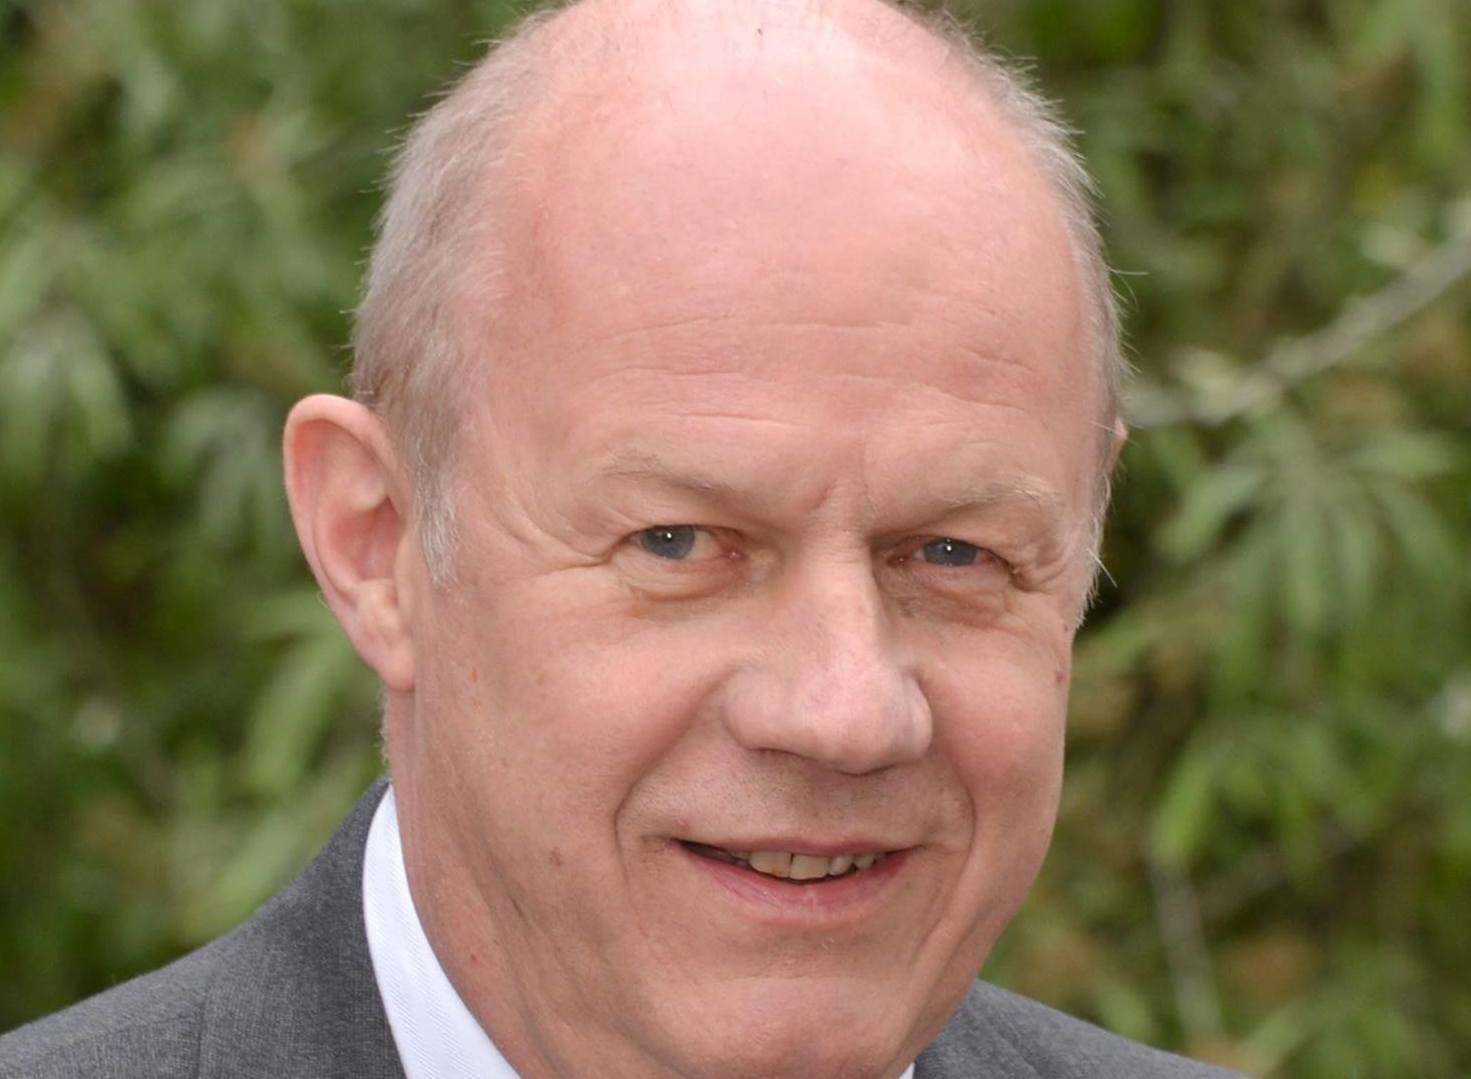 MP Damian Green fears the UK could face by similar pipe bomb attacks to those that happened in America